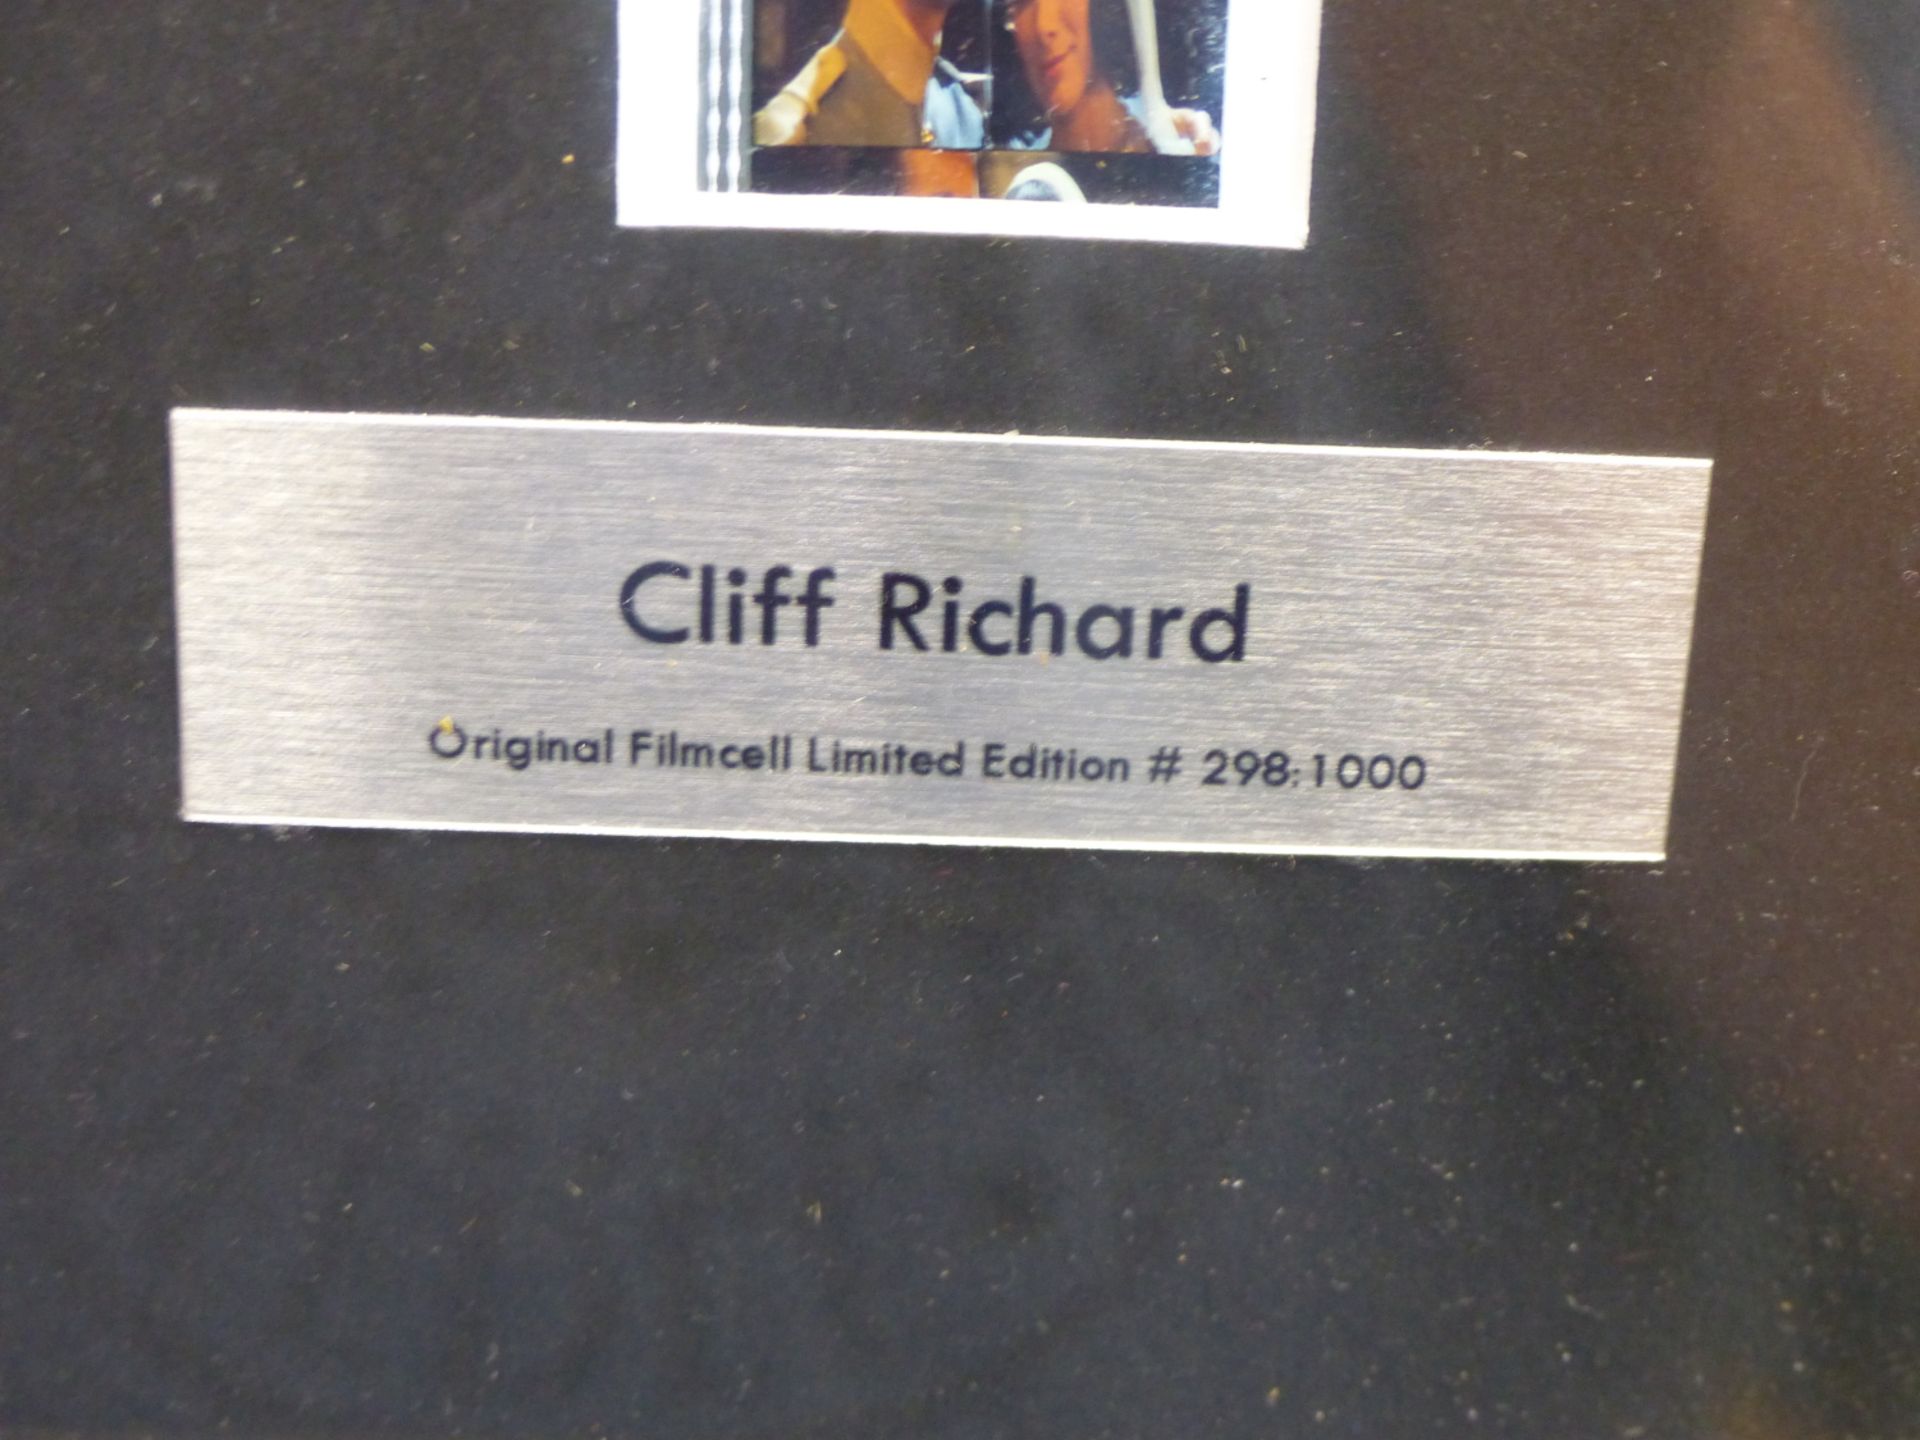 A CLIFF RICHARD ORIGINAL FILMCELL EDITION # 298:1000 AND A CLIFF RICHARD PURSE. - Image 4 of 5